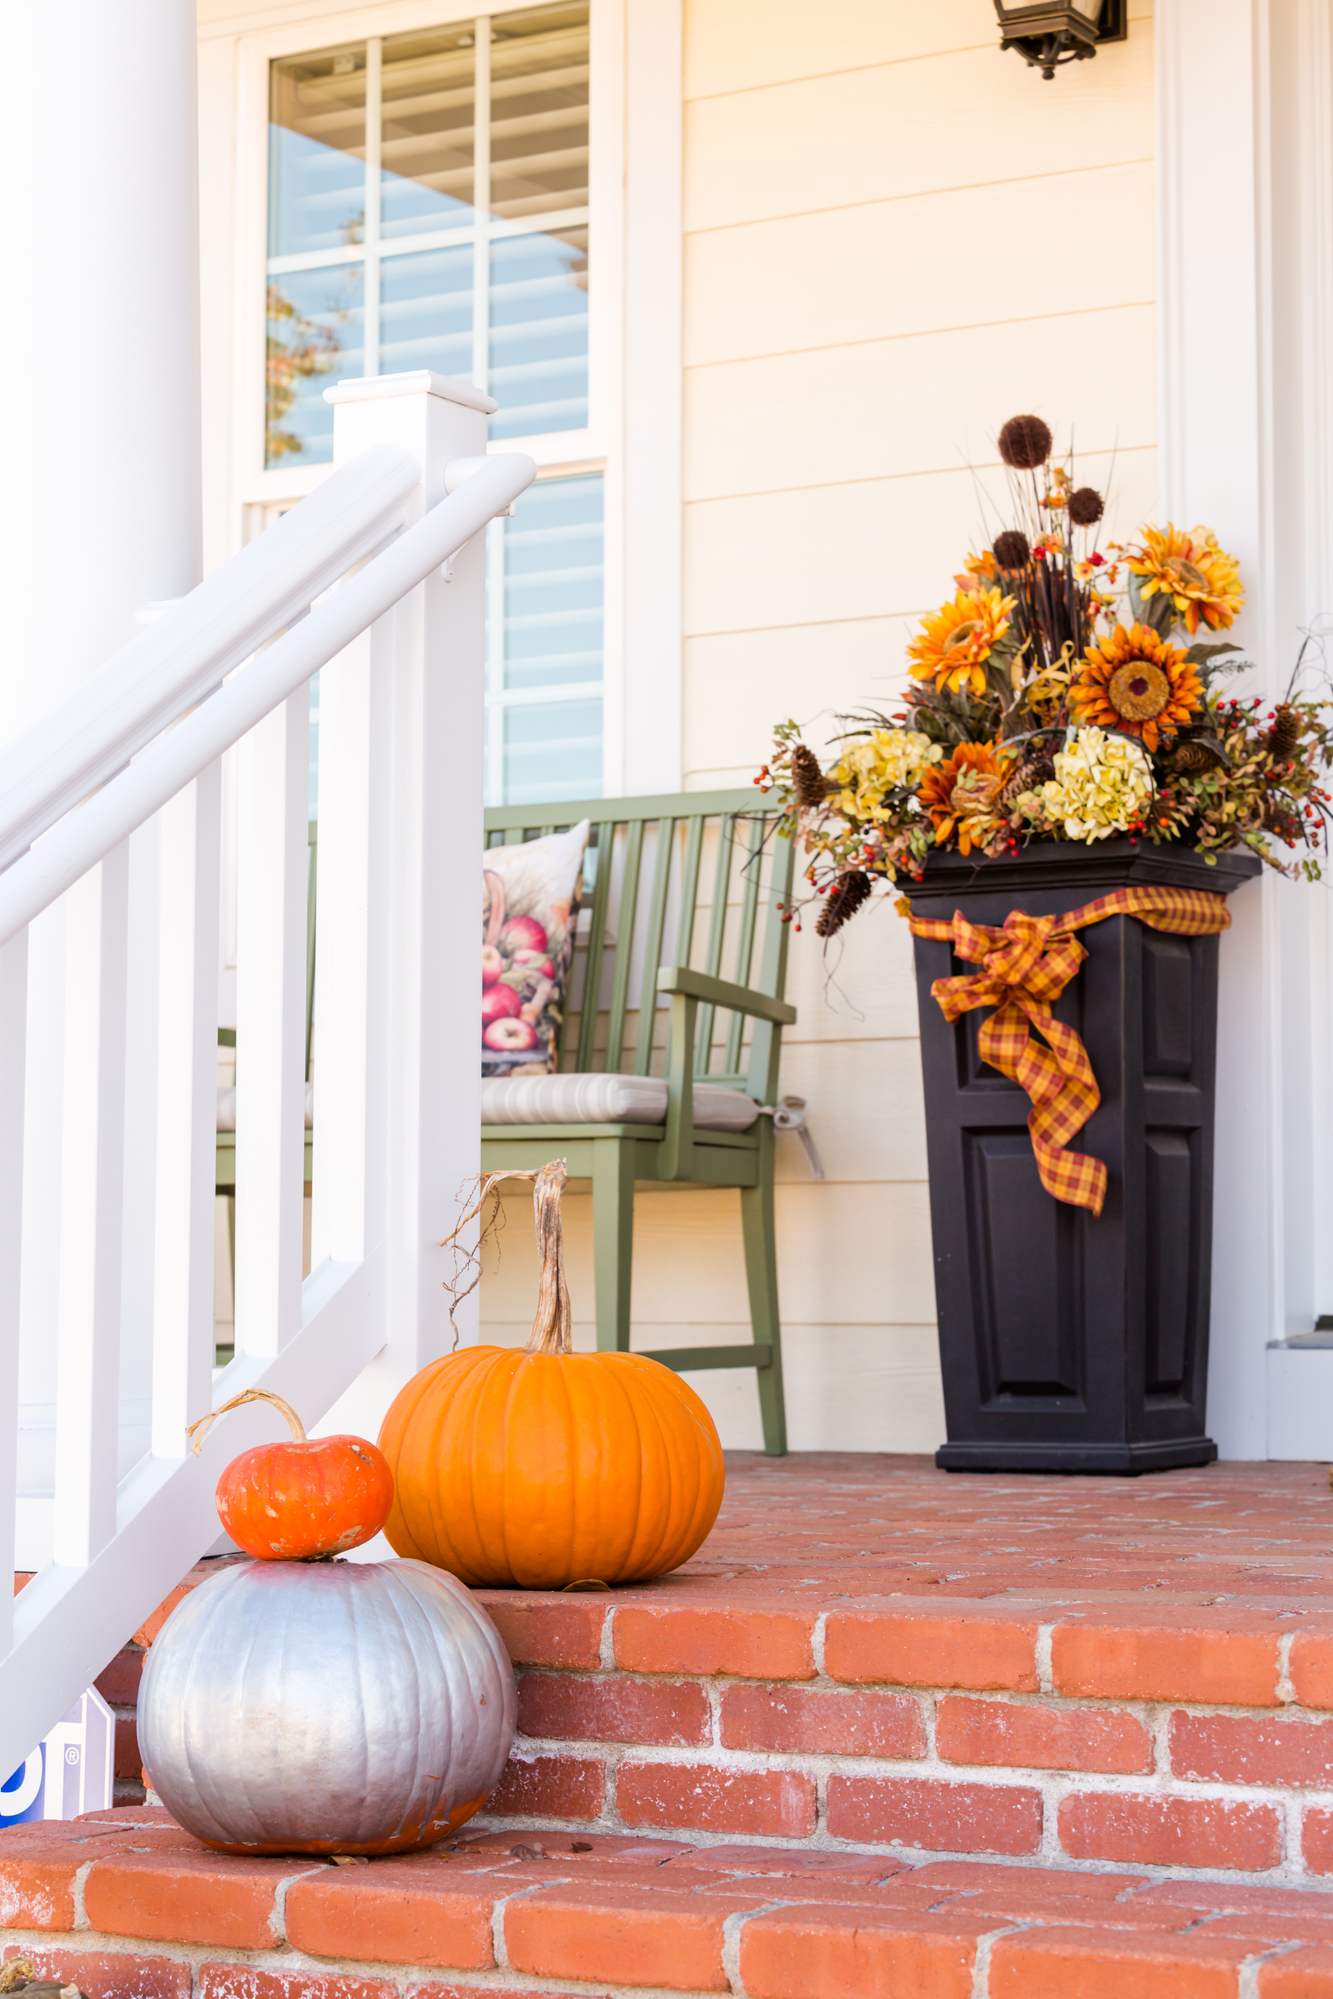 Fall Decor on Front Porch decorated for Halloween